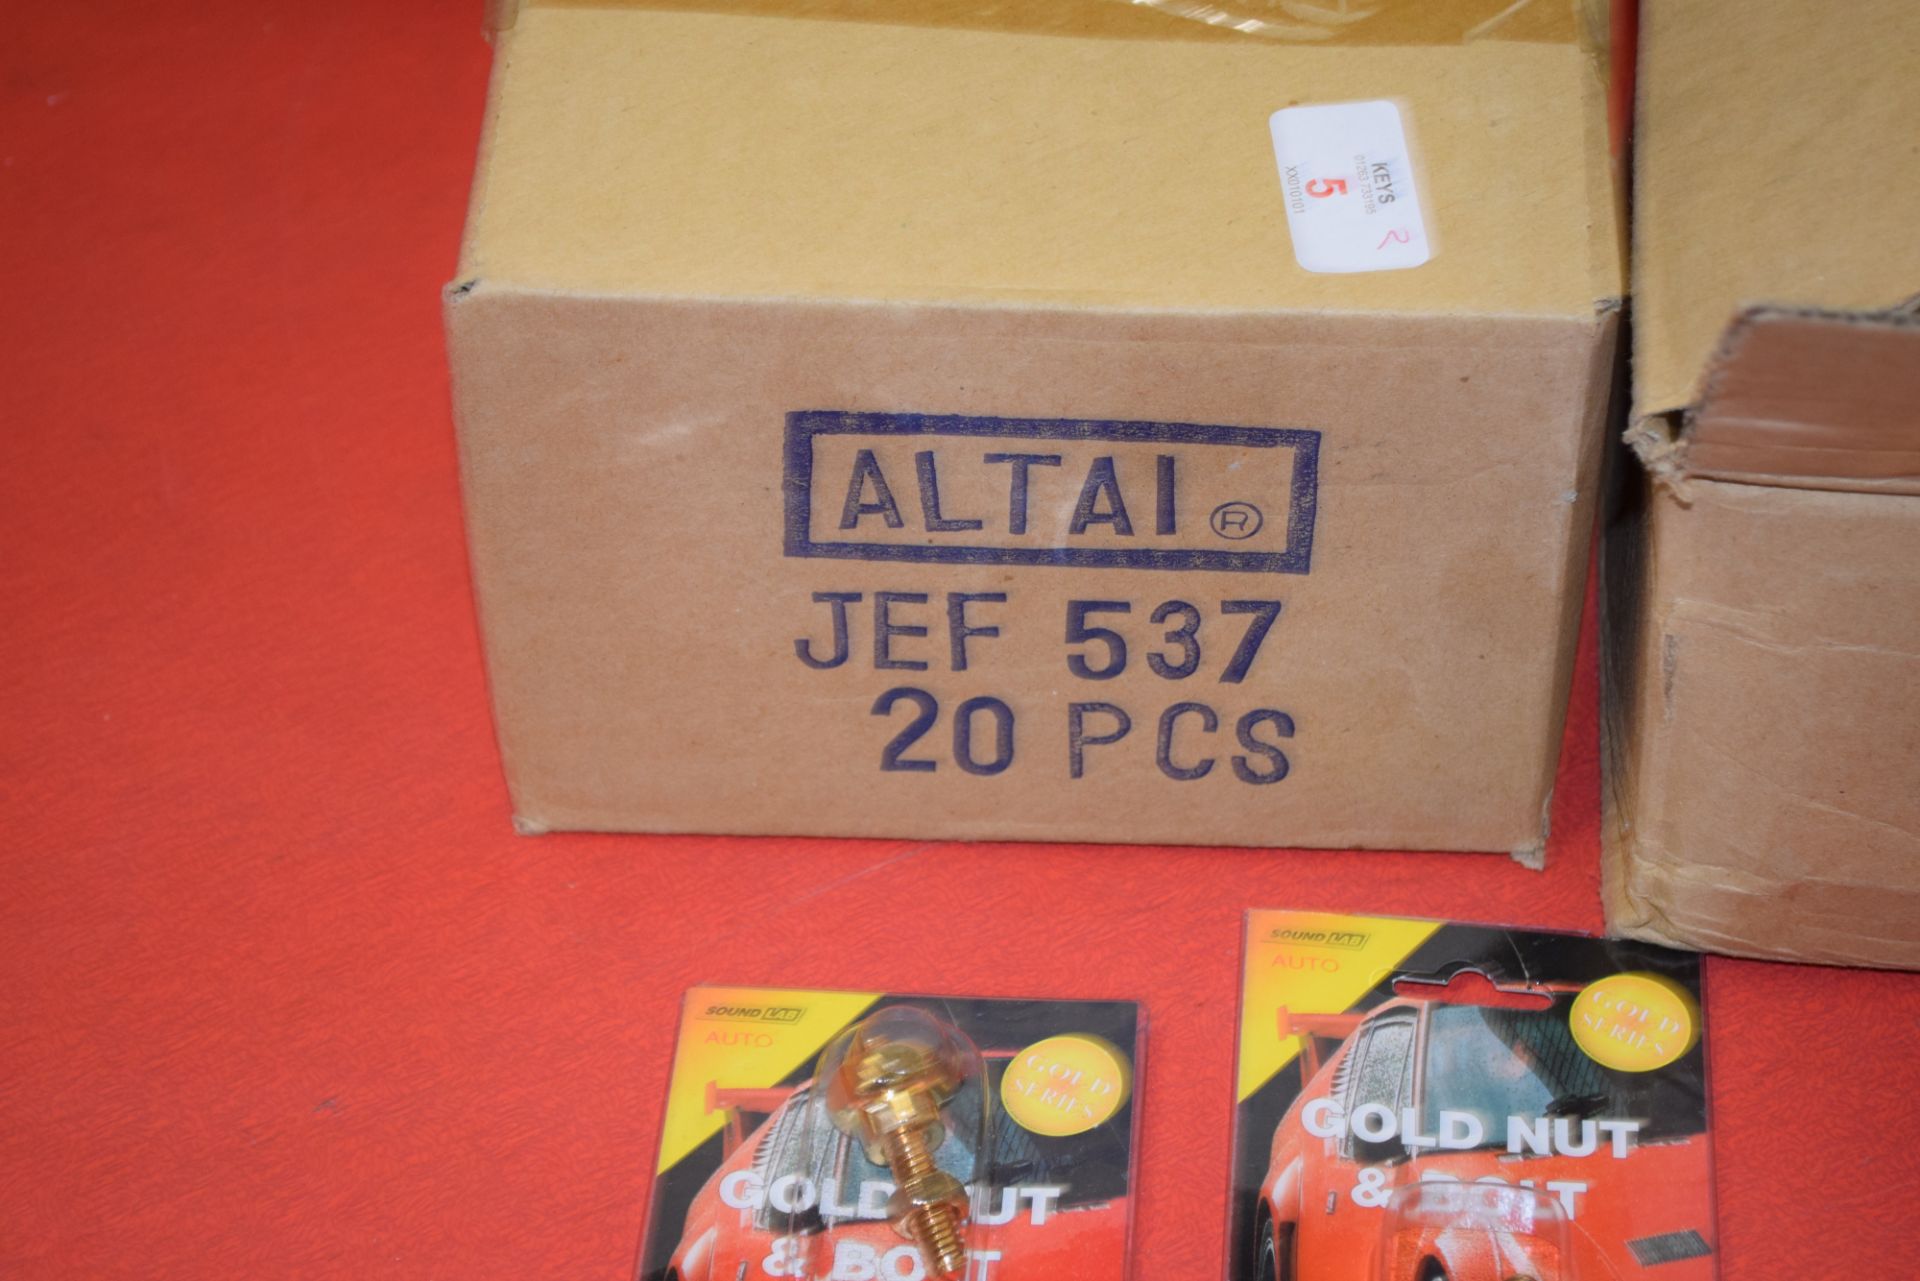 TWO BOXES CONTAINING SOUND LAB AUTO GOLD NUT AND BOLT CONNECTORS, APPROX 20 PIECES PER BOX - Image 3 of 3